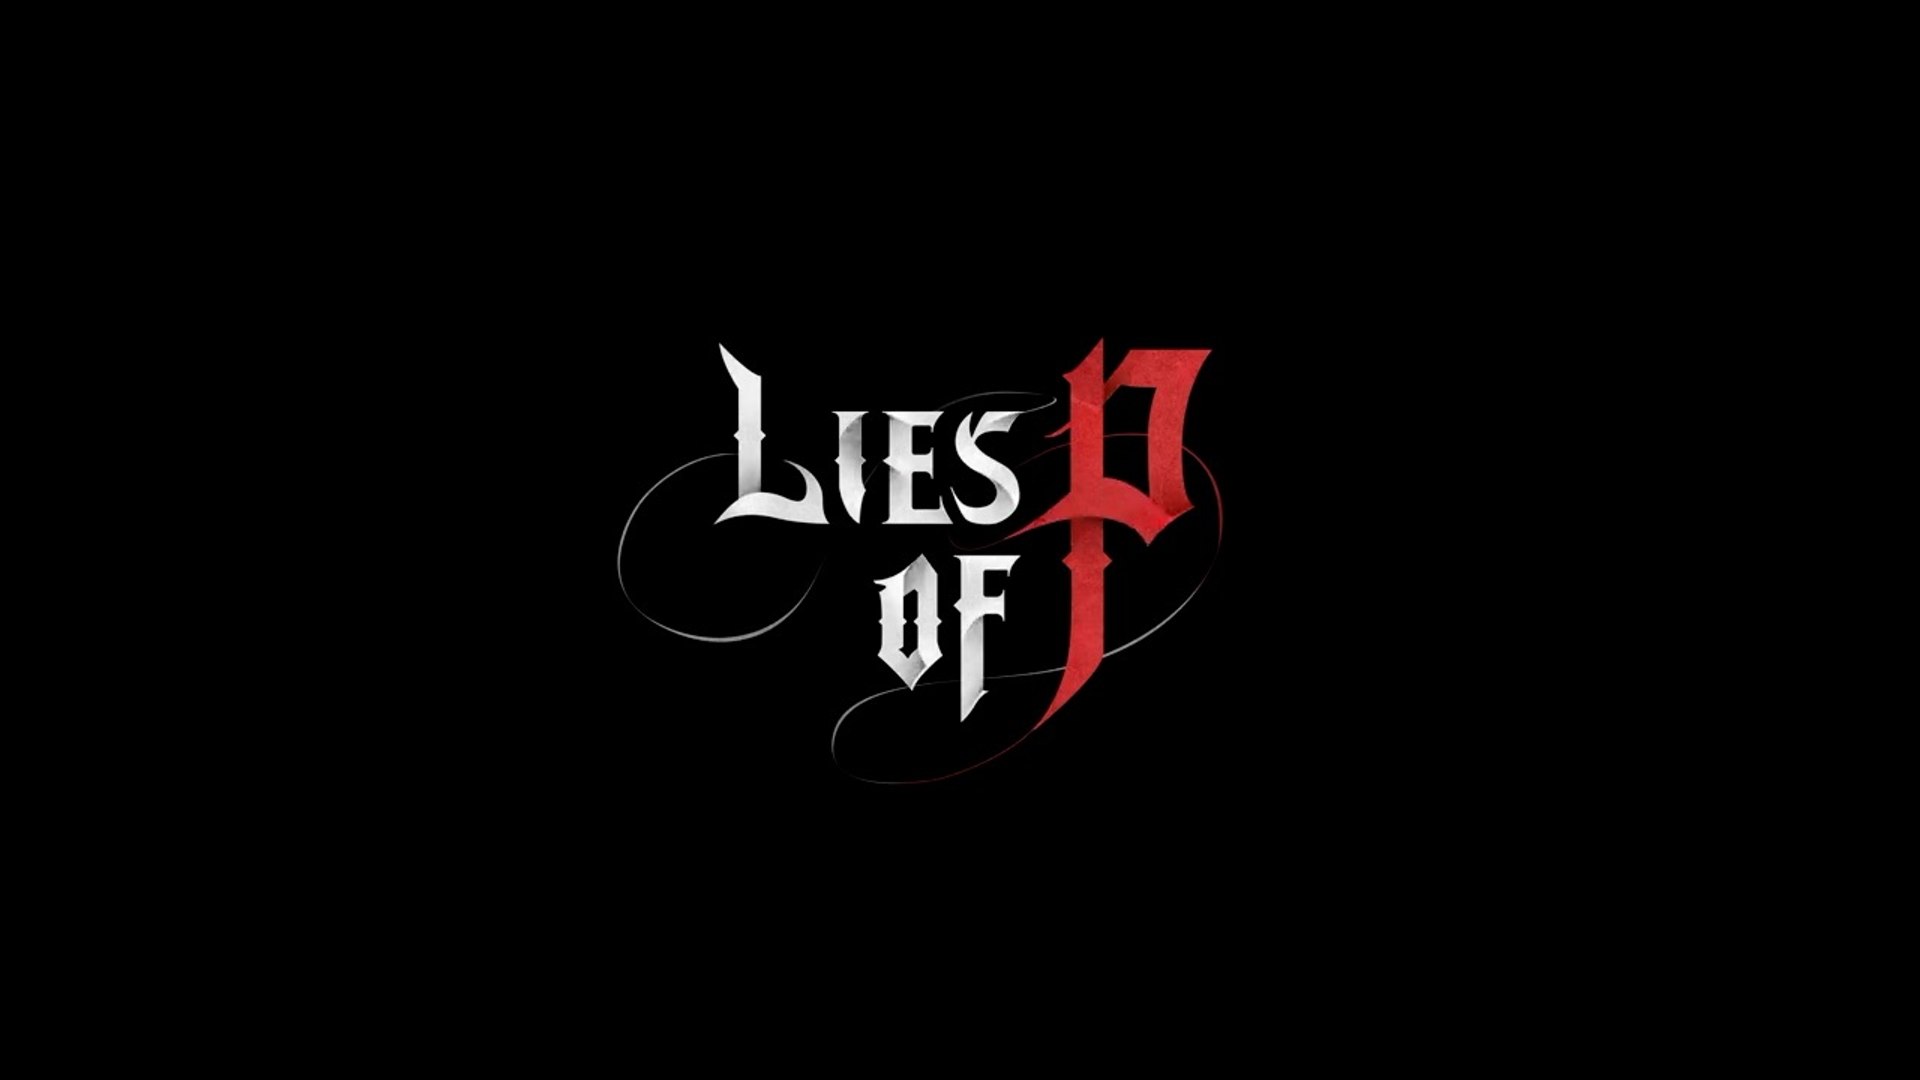 Lies of P - Official Gameplay Reveal Trailer